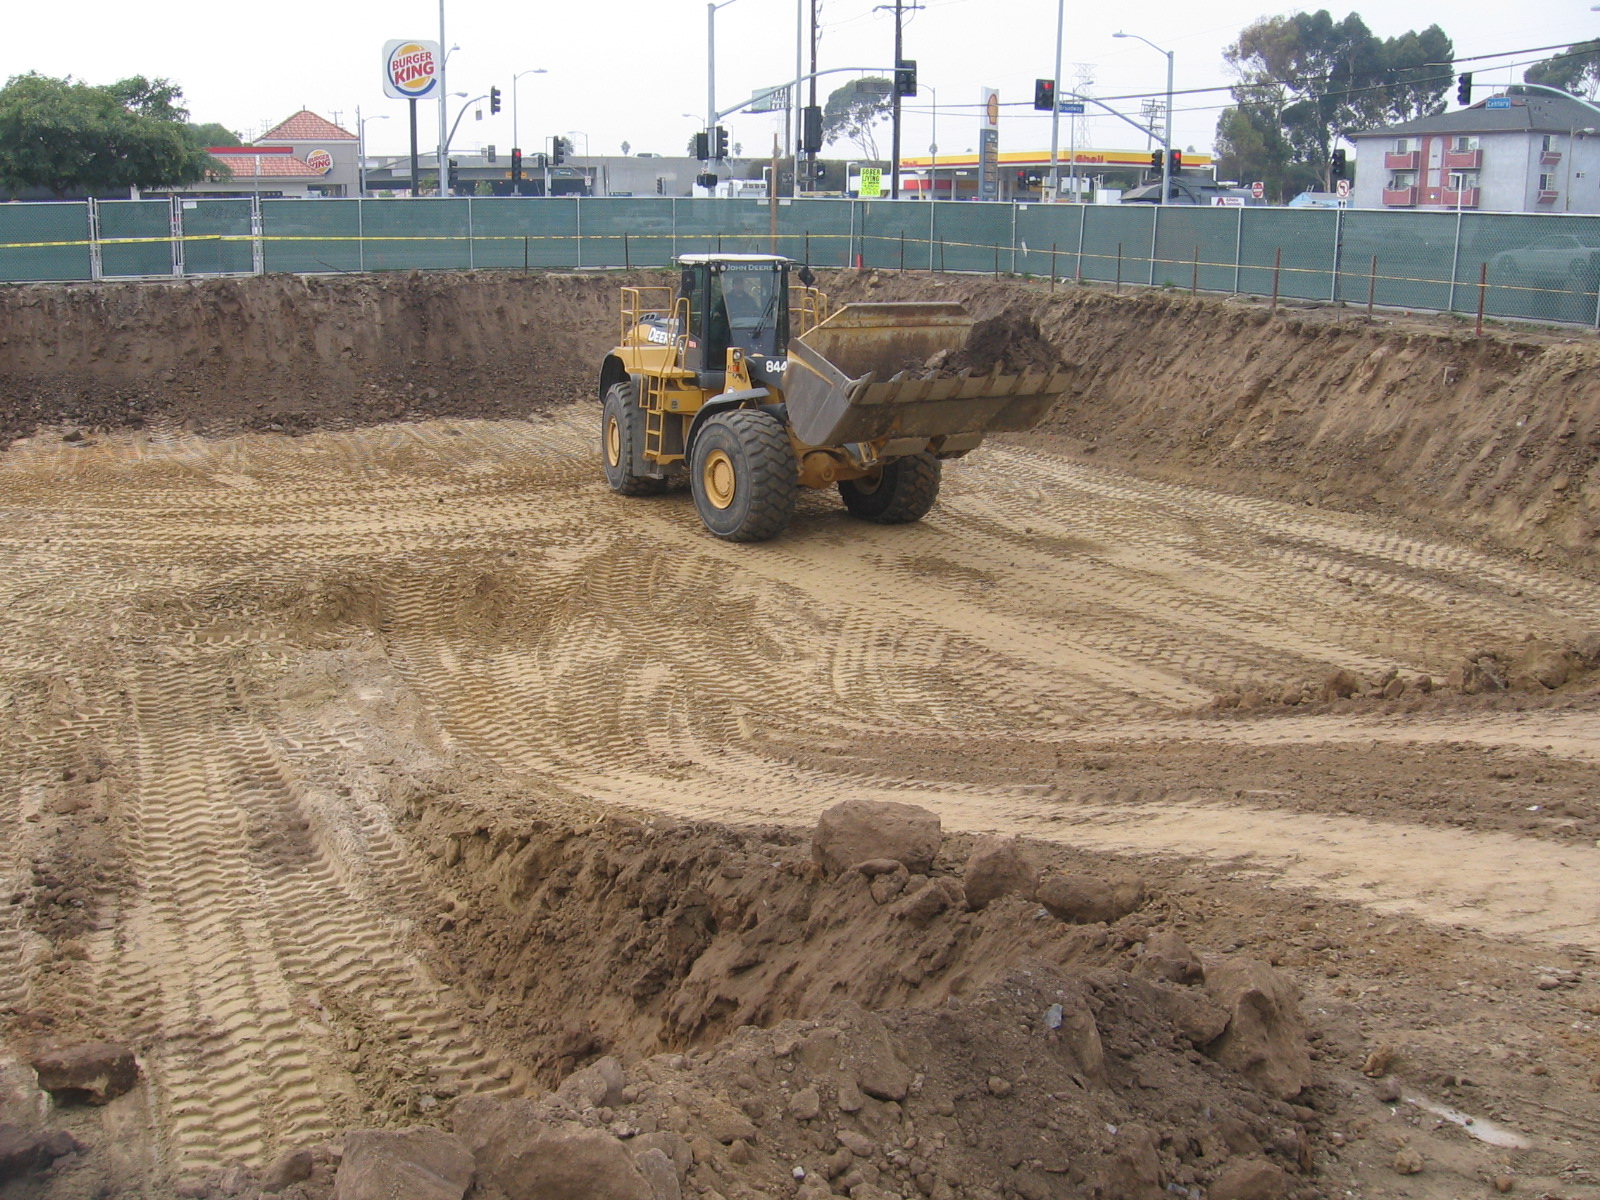 Image of property under construction. In the view there is a tractor